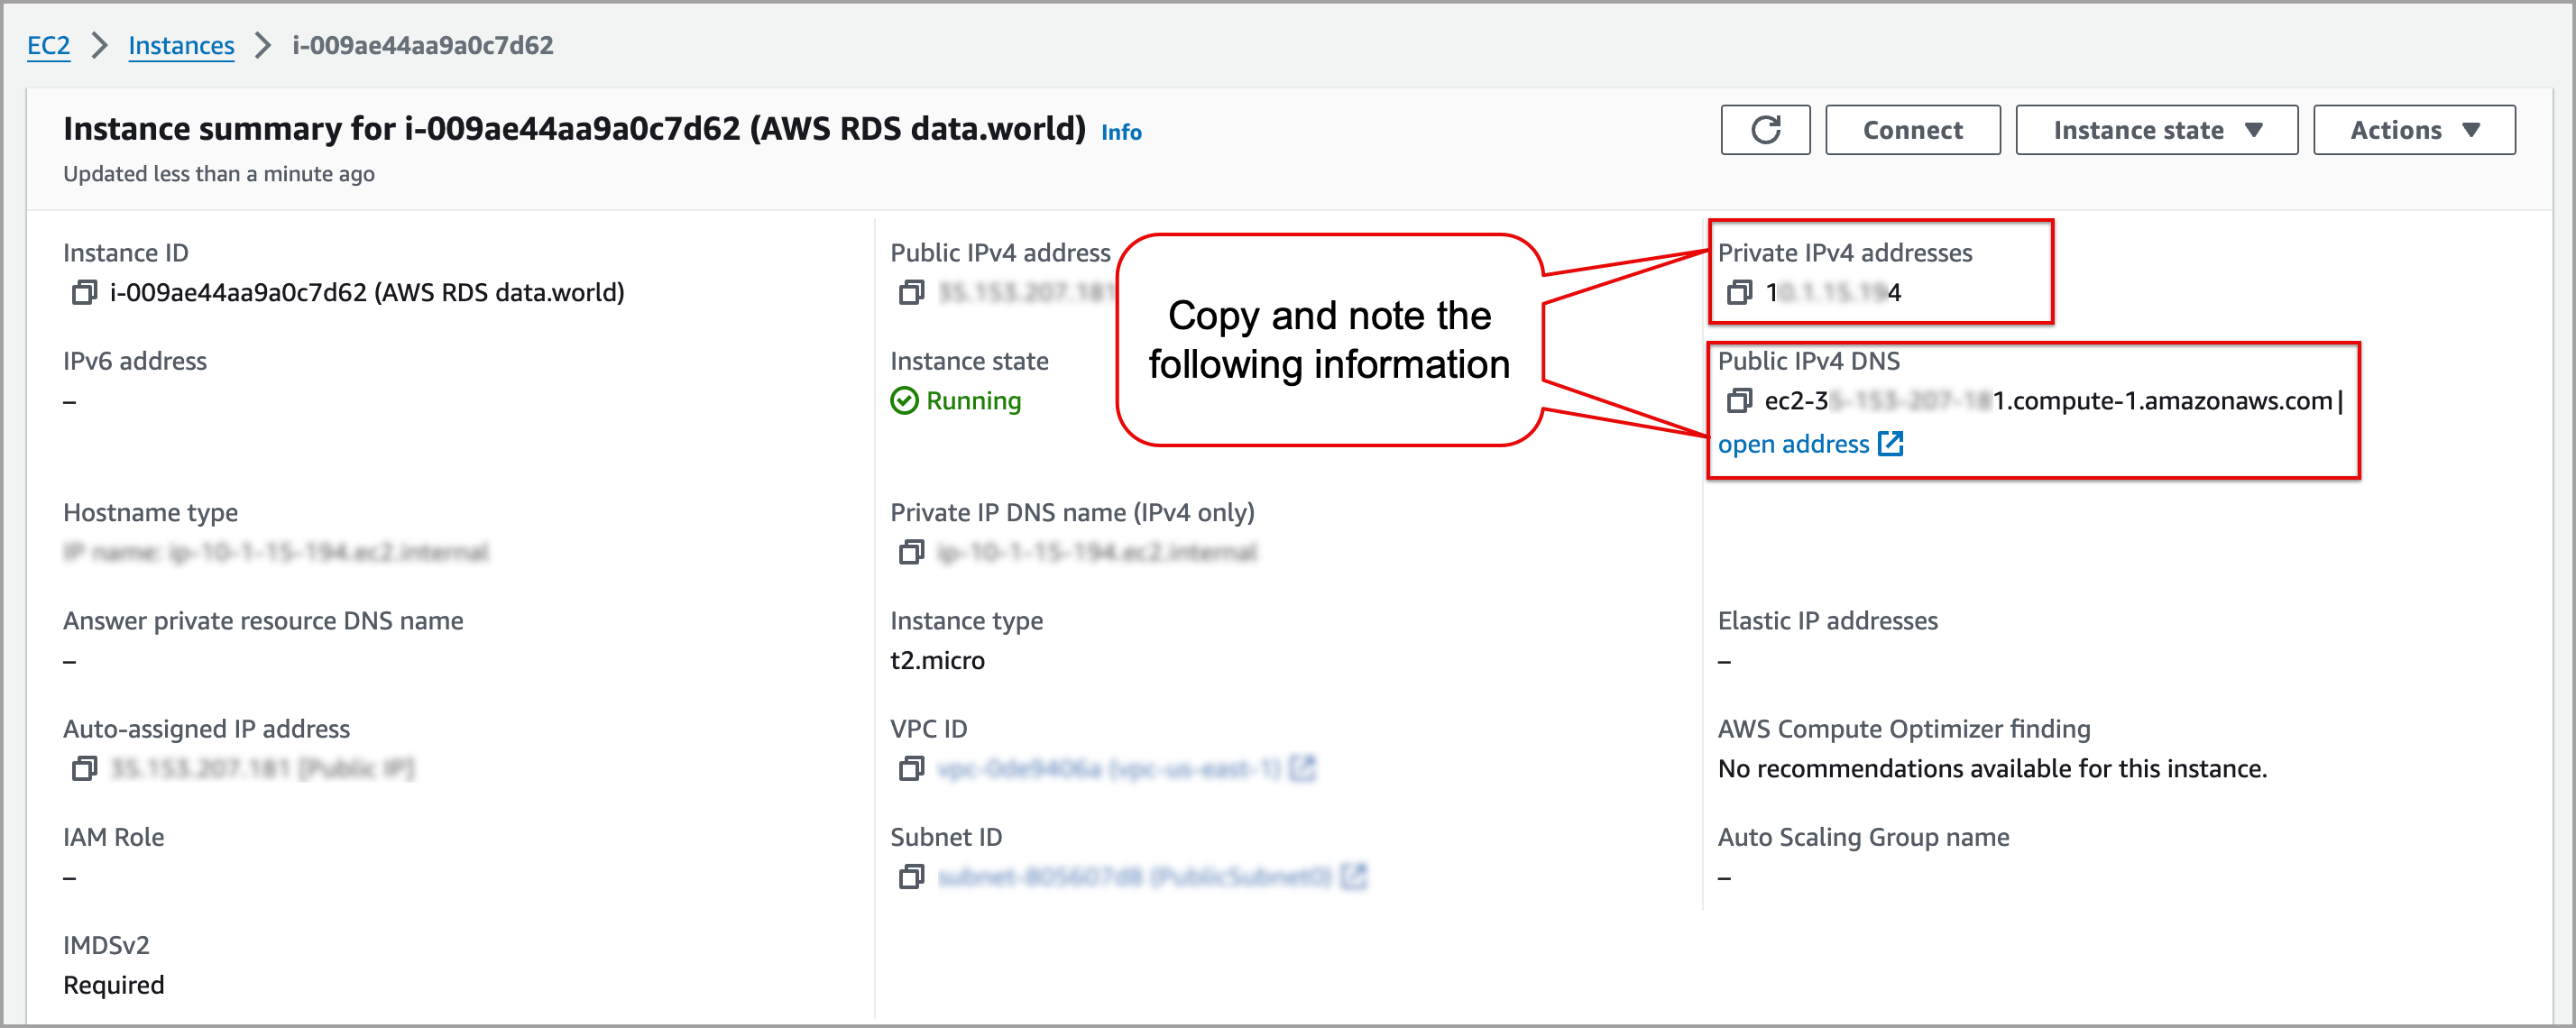 AWS-RDS-9-copy-and-note-instance-information.png